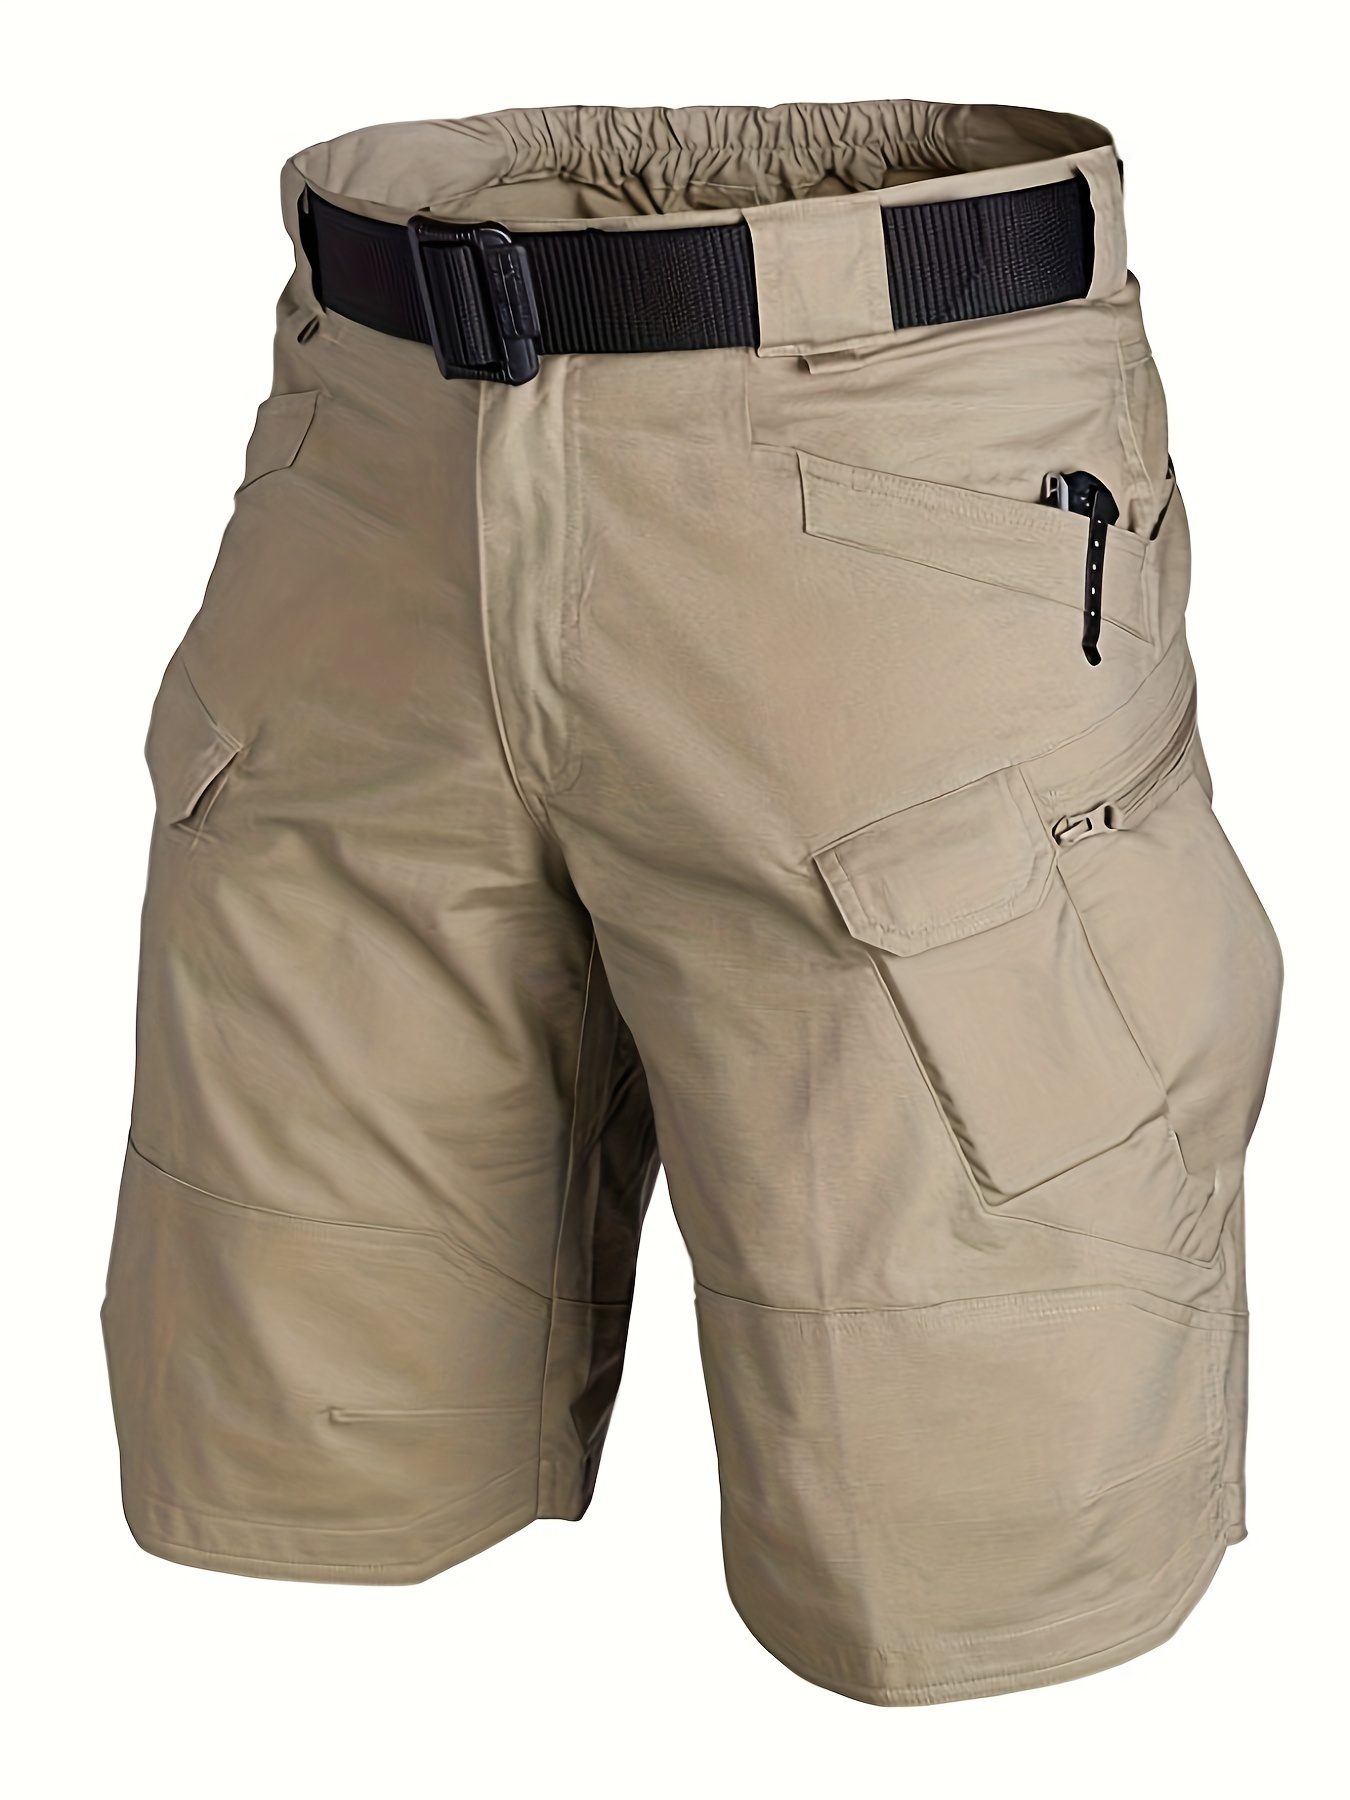 Men's Tactical Shorts With Multi Pockets, Casual Durable Waterproof Cargo Shorts For Outdoor Hiking Trekking